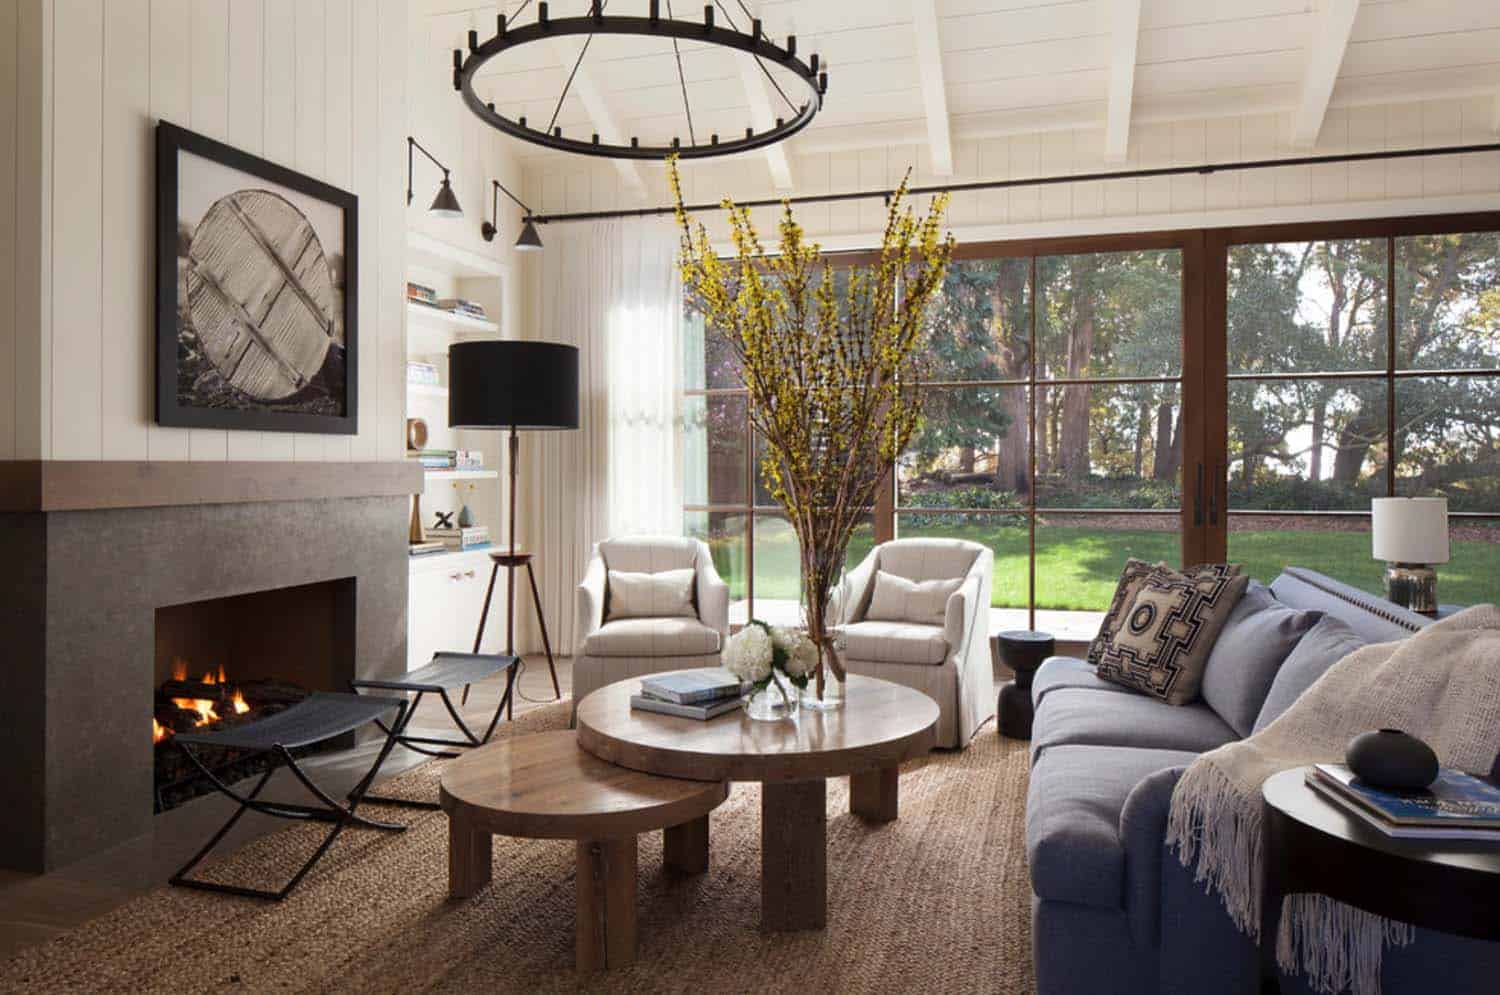 Rustic-chic farmhouse style dwelling in Northern California